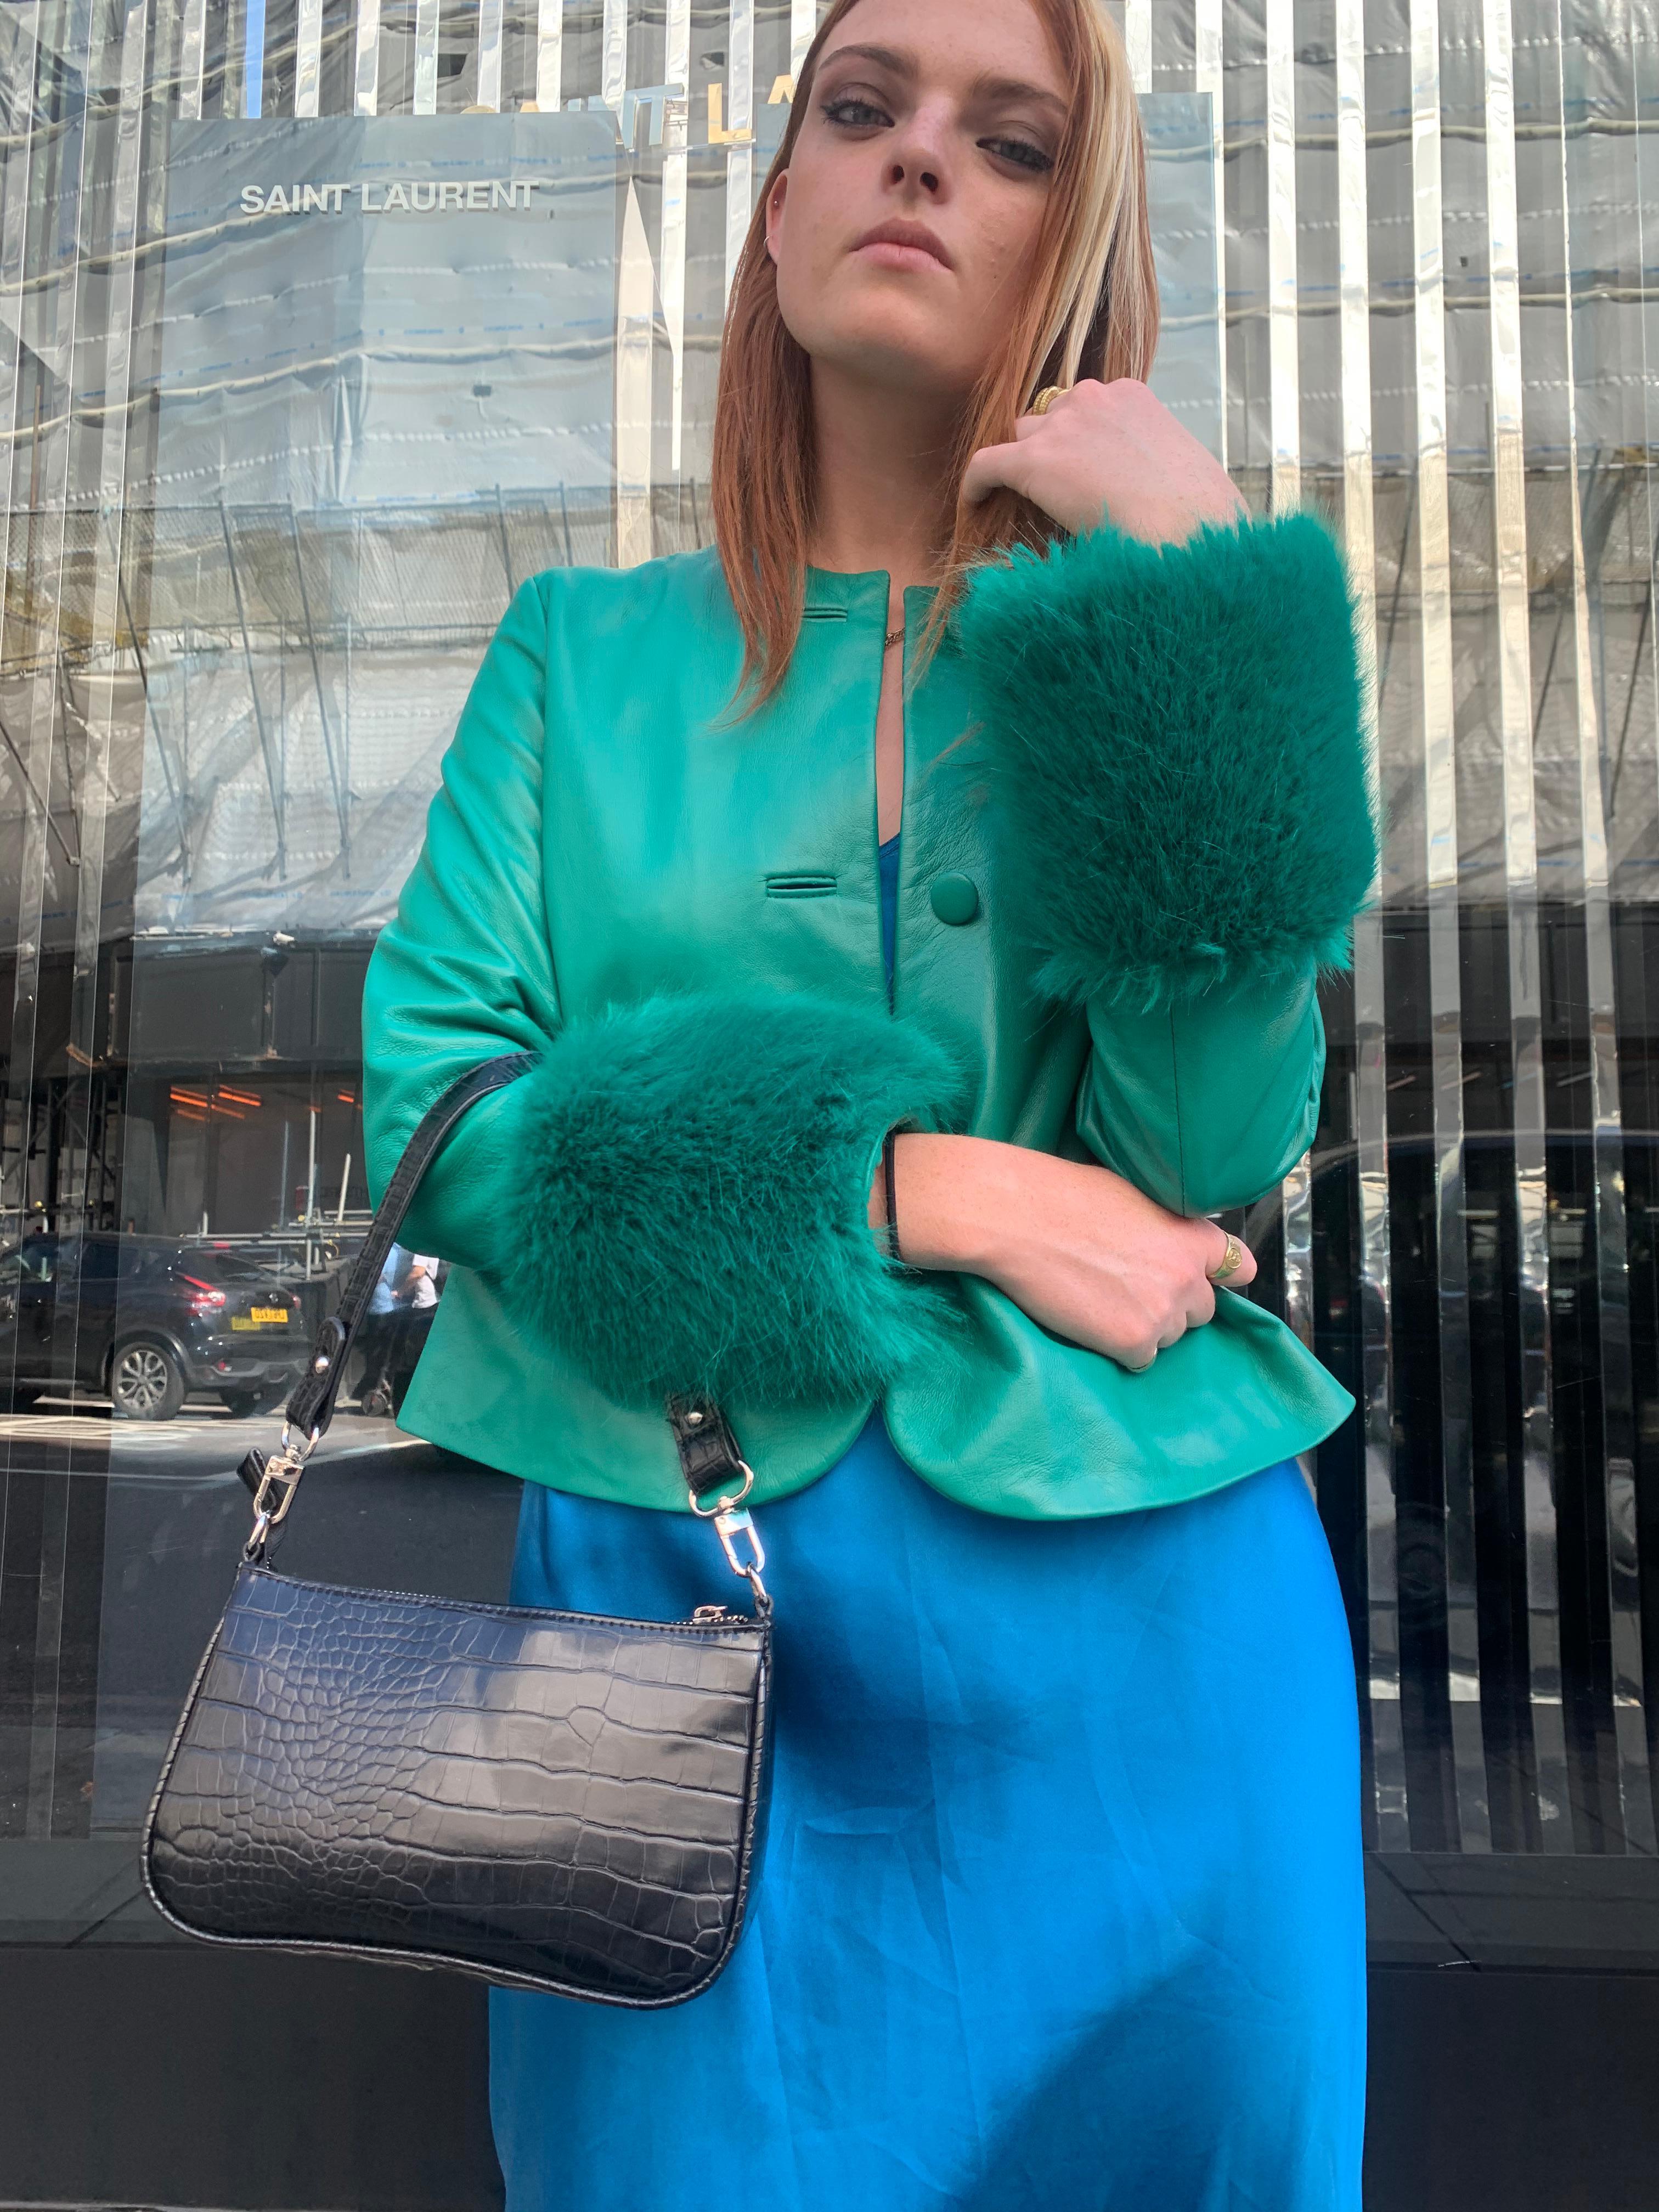 Verheyen Vita Cropped Jacket in Emerald Green Leather with Faux Fur - Size uk 10

Handmade in London, made with 100% Italian Lambs Leather and the highest quality of faux fur to match, this luxury item is an investment piece to wear for a lifetime. 